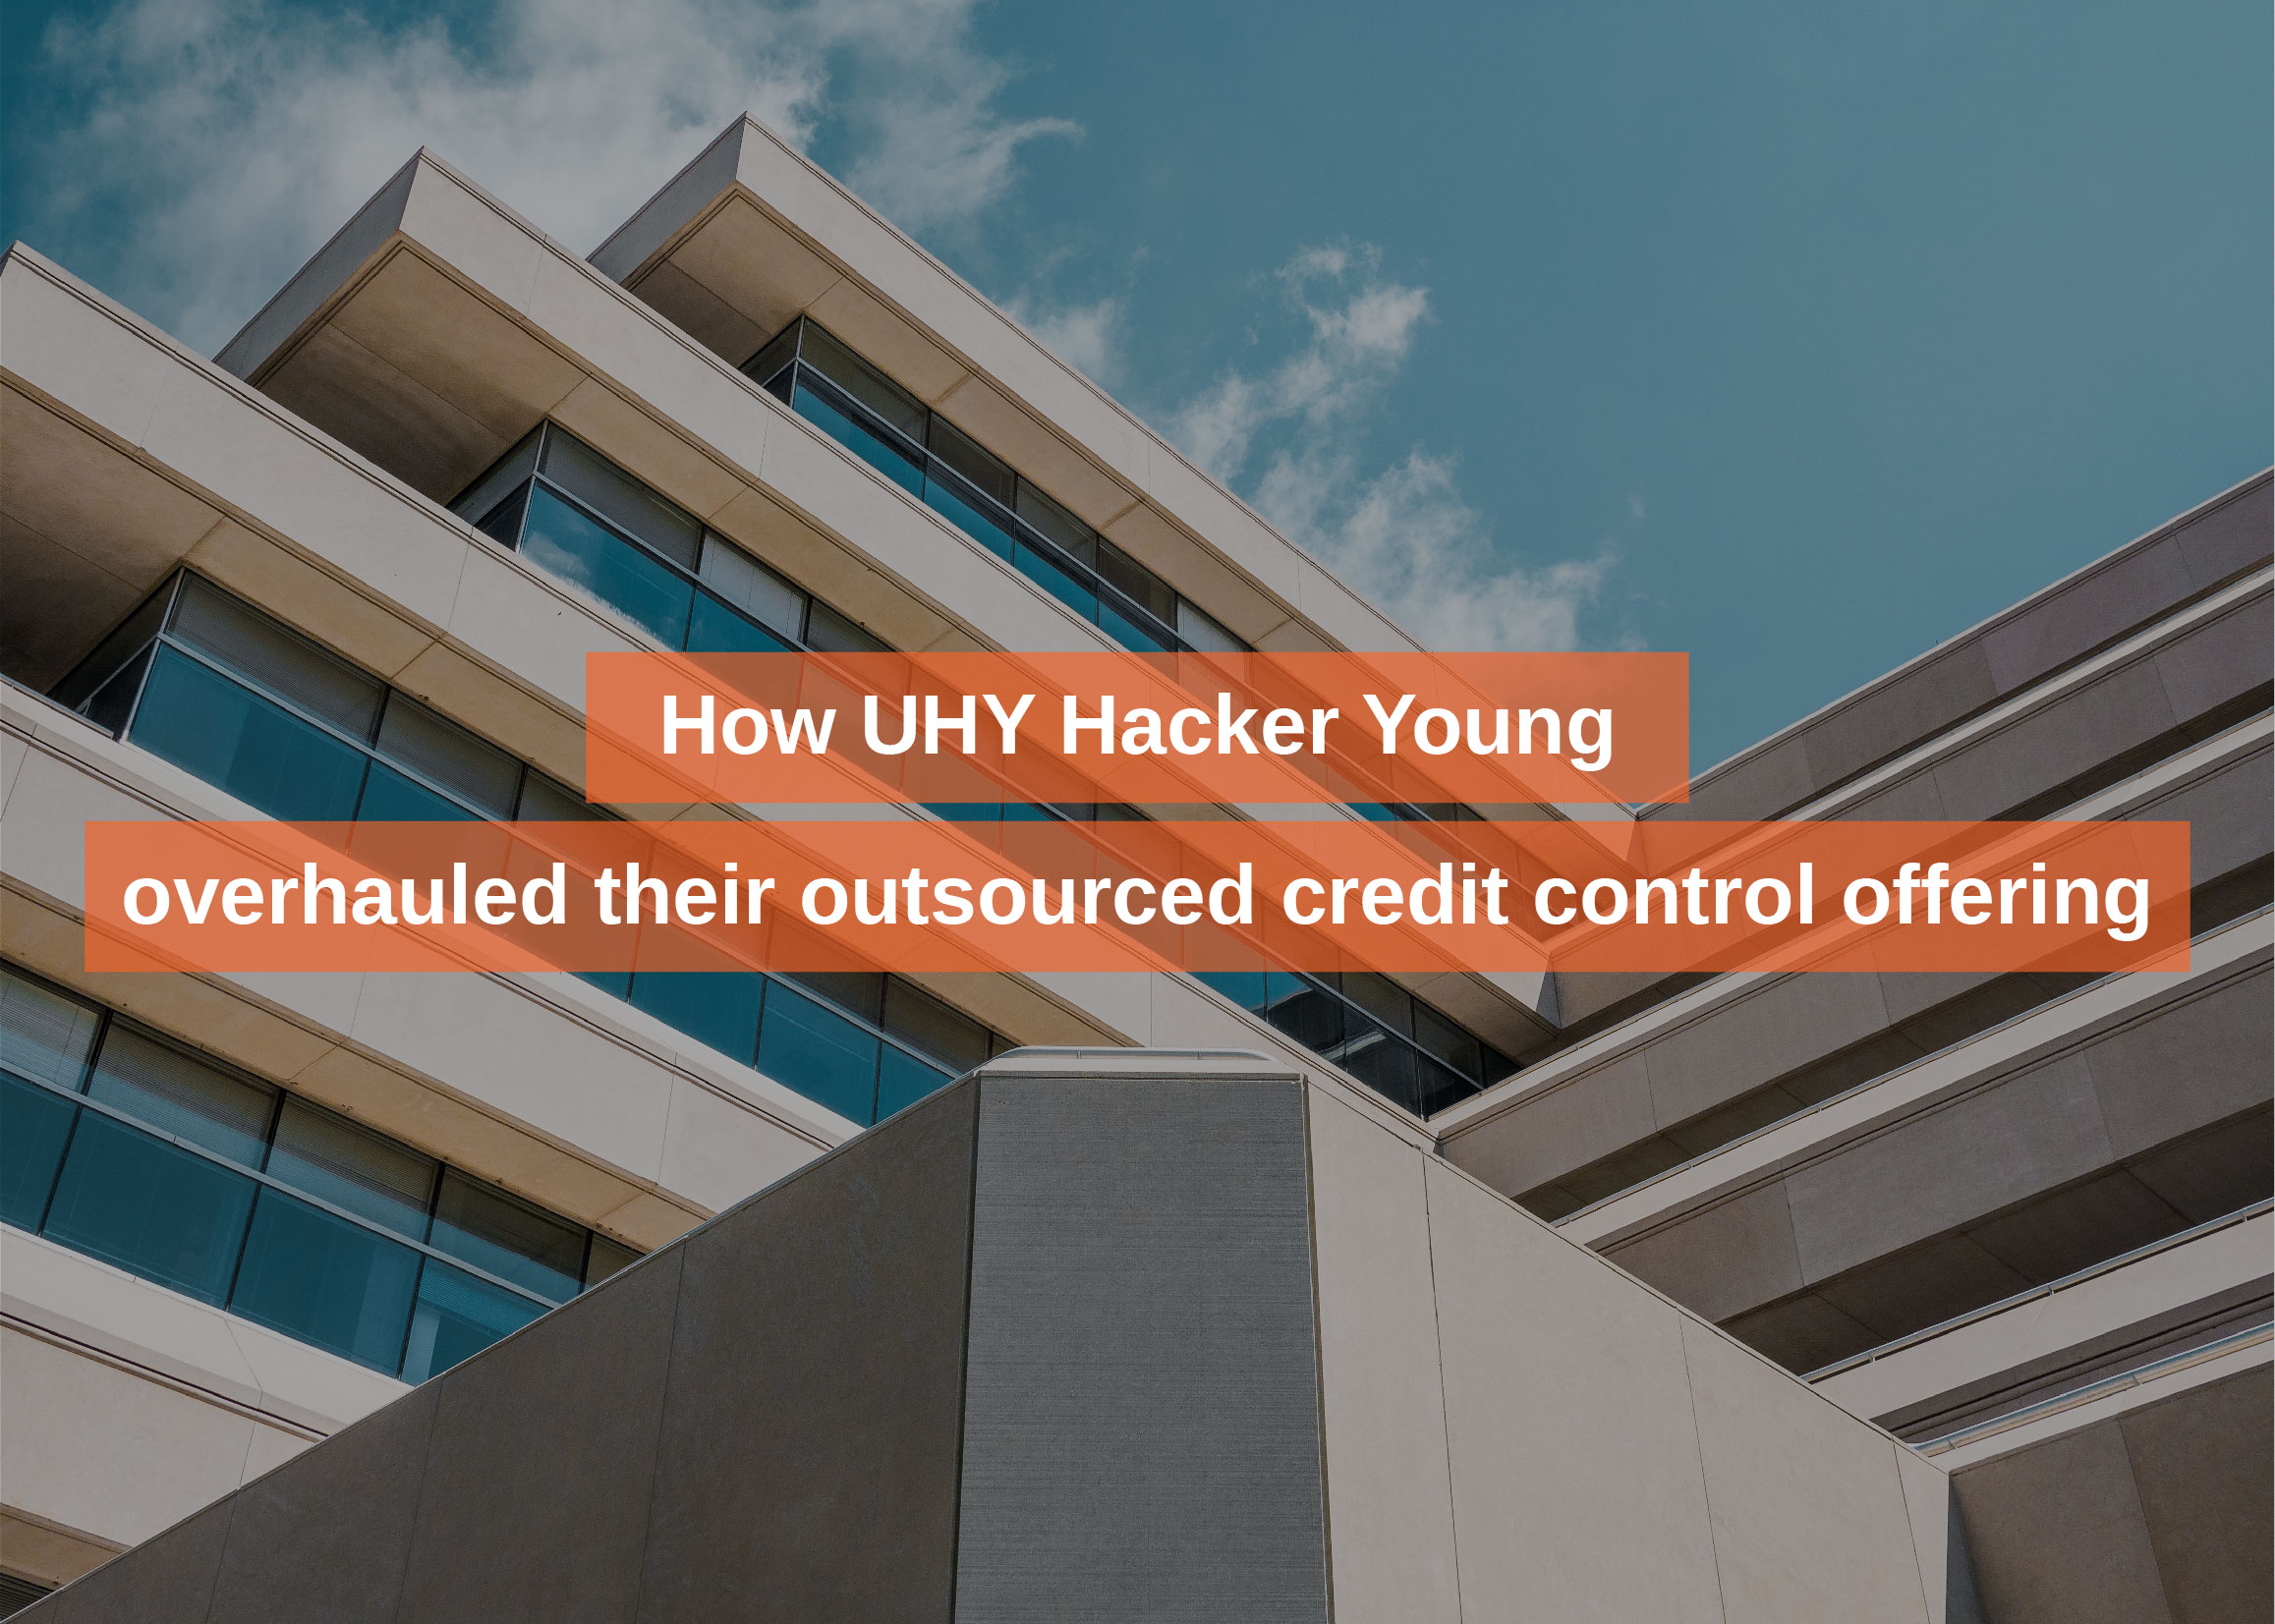 How UHY Hacker Young overhauled their outsourced credit control